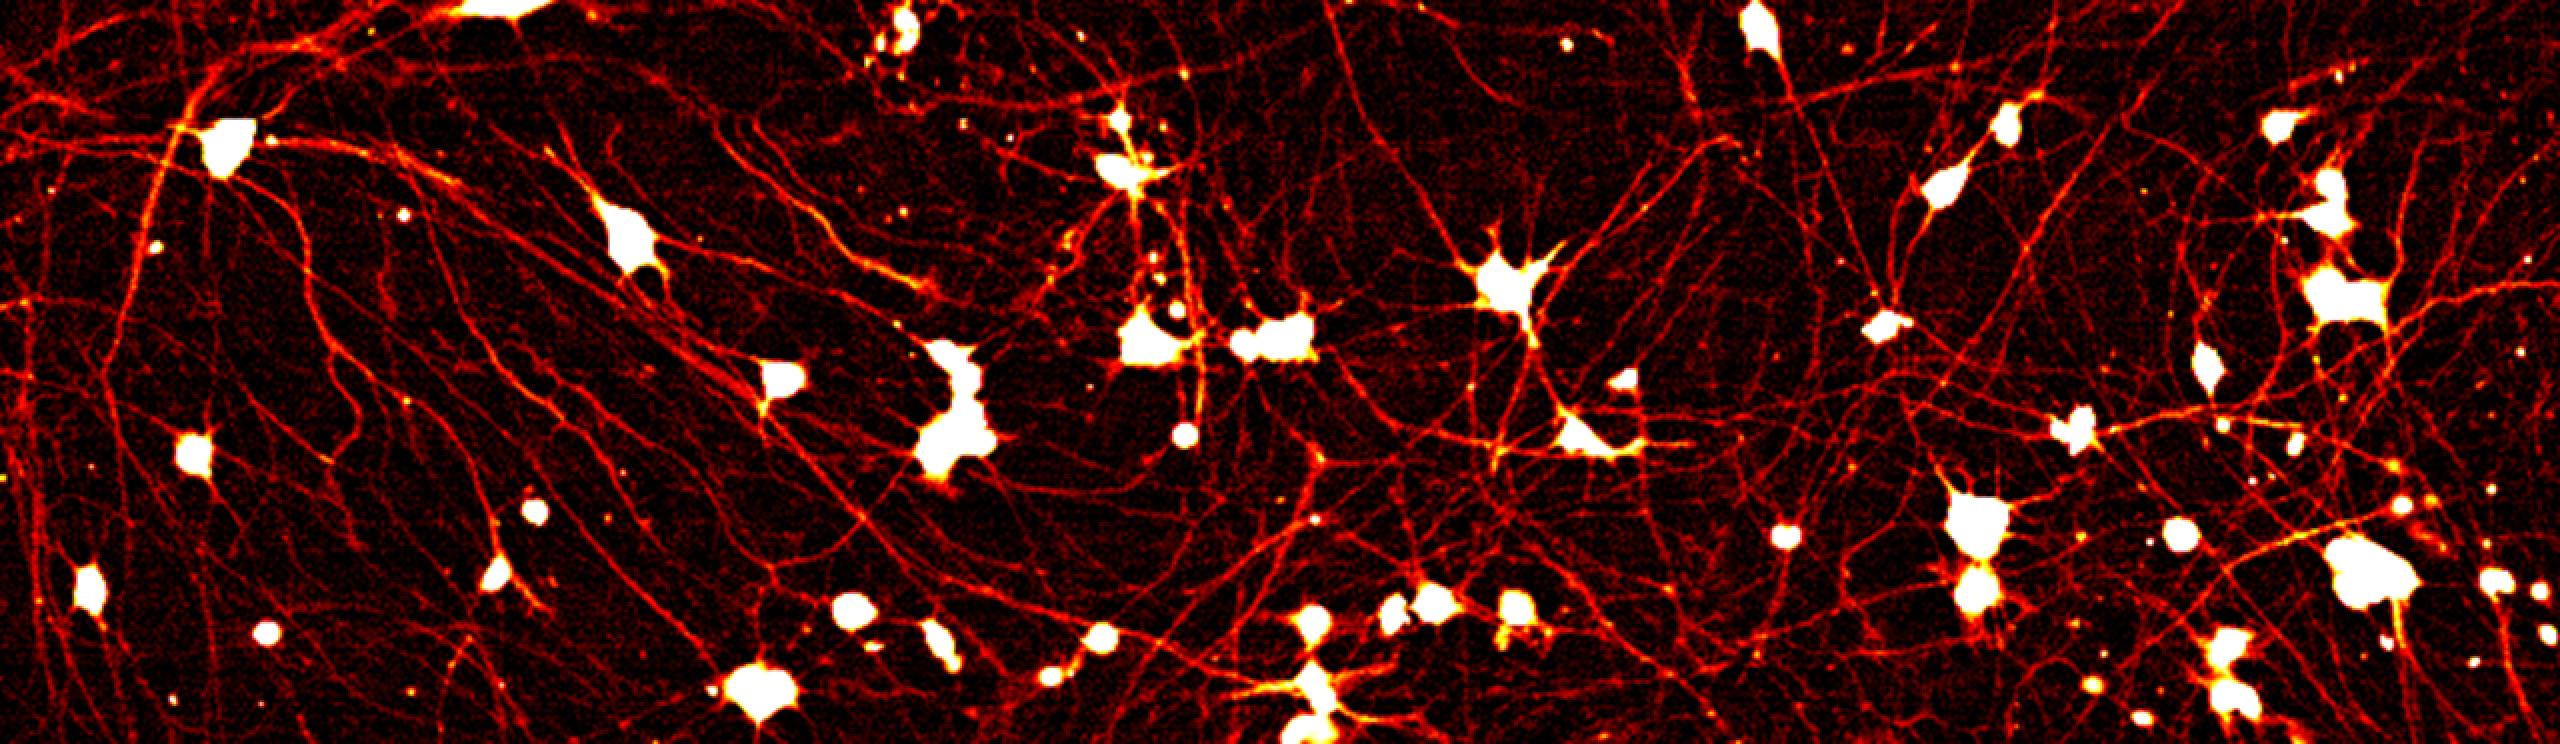 Day 14 human neurons differentiated from induced pluripotent stem cells (iPSCs) expressing Dendra2 driven by the native GAPDH promoter.